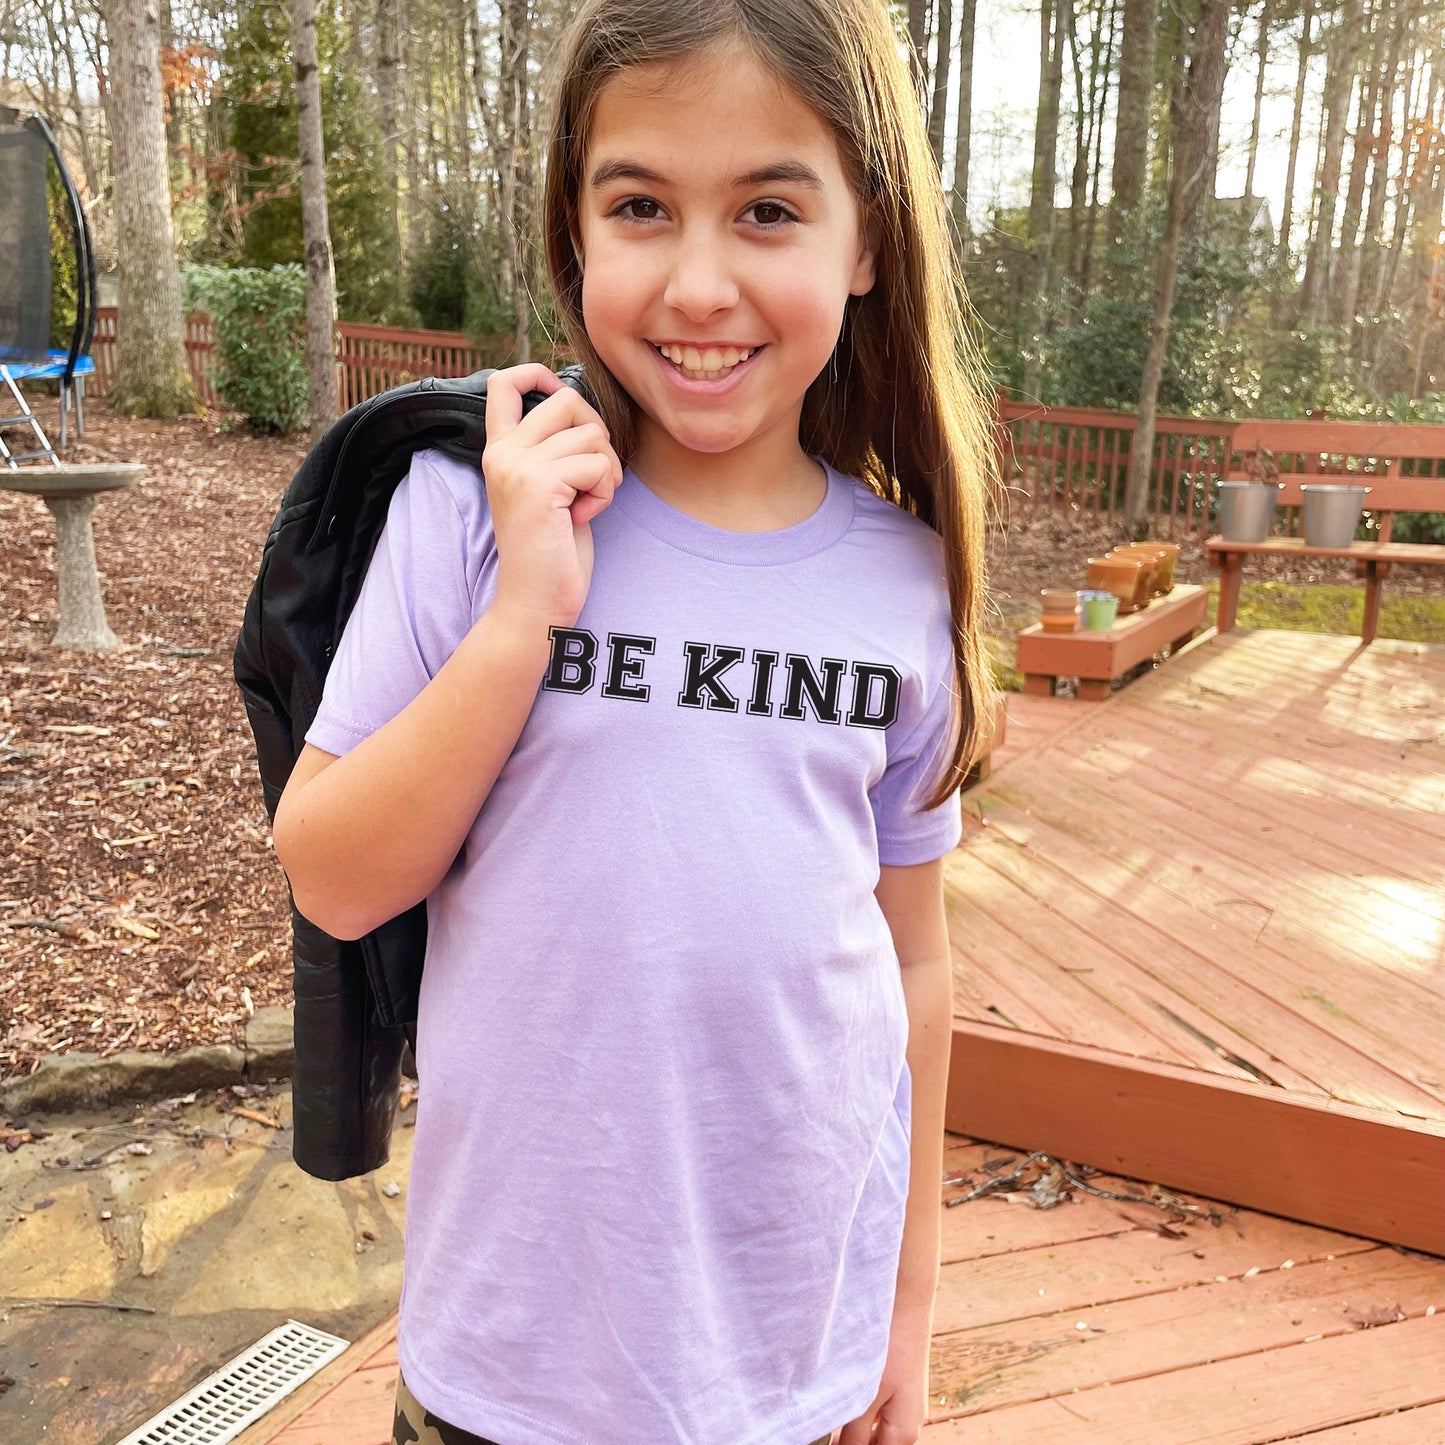 Be Kind - Feel Good Collection - Kid's Tee - Columbia Blue or Lavender